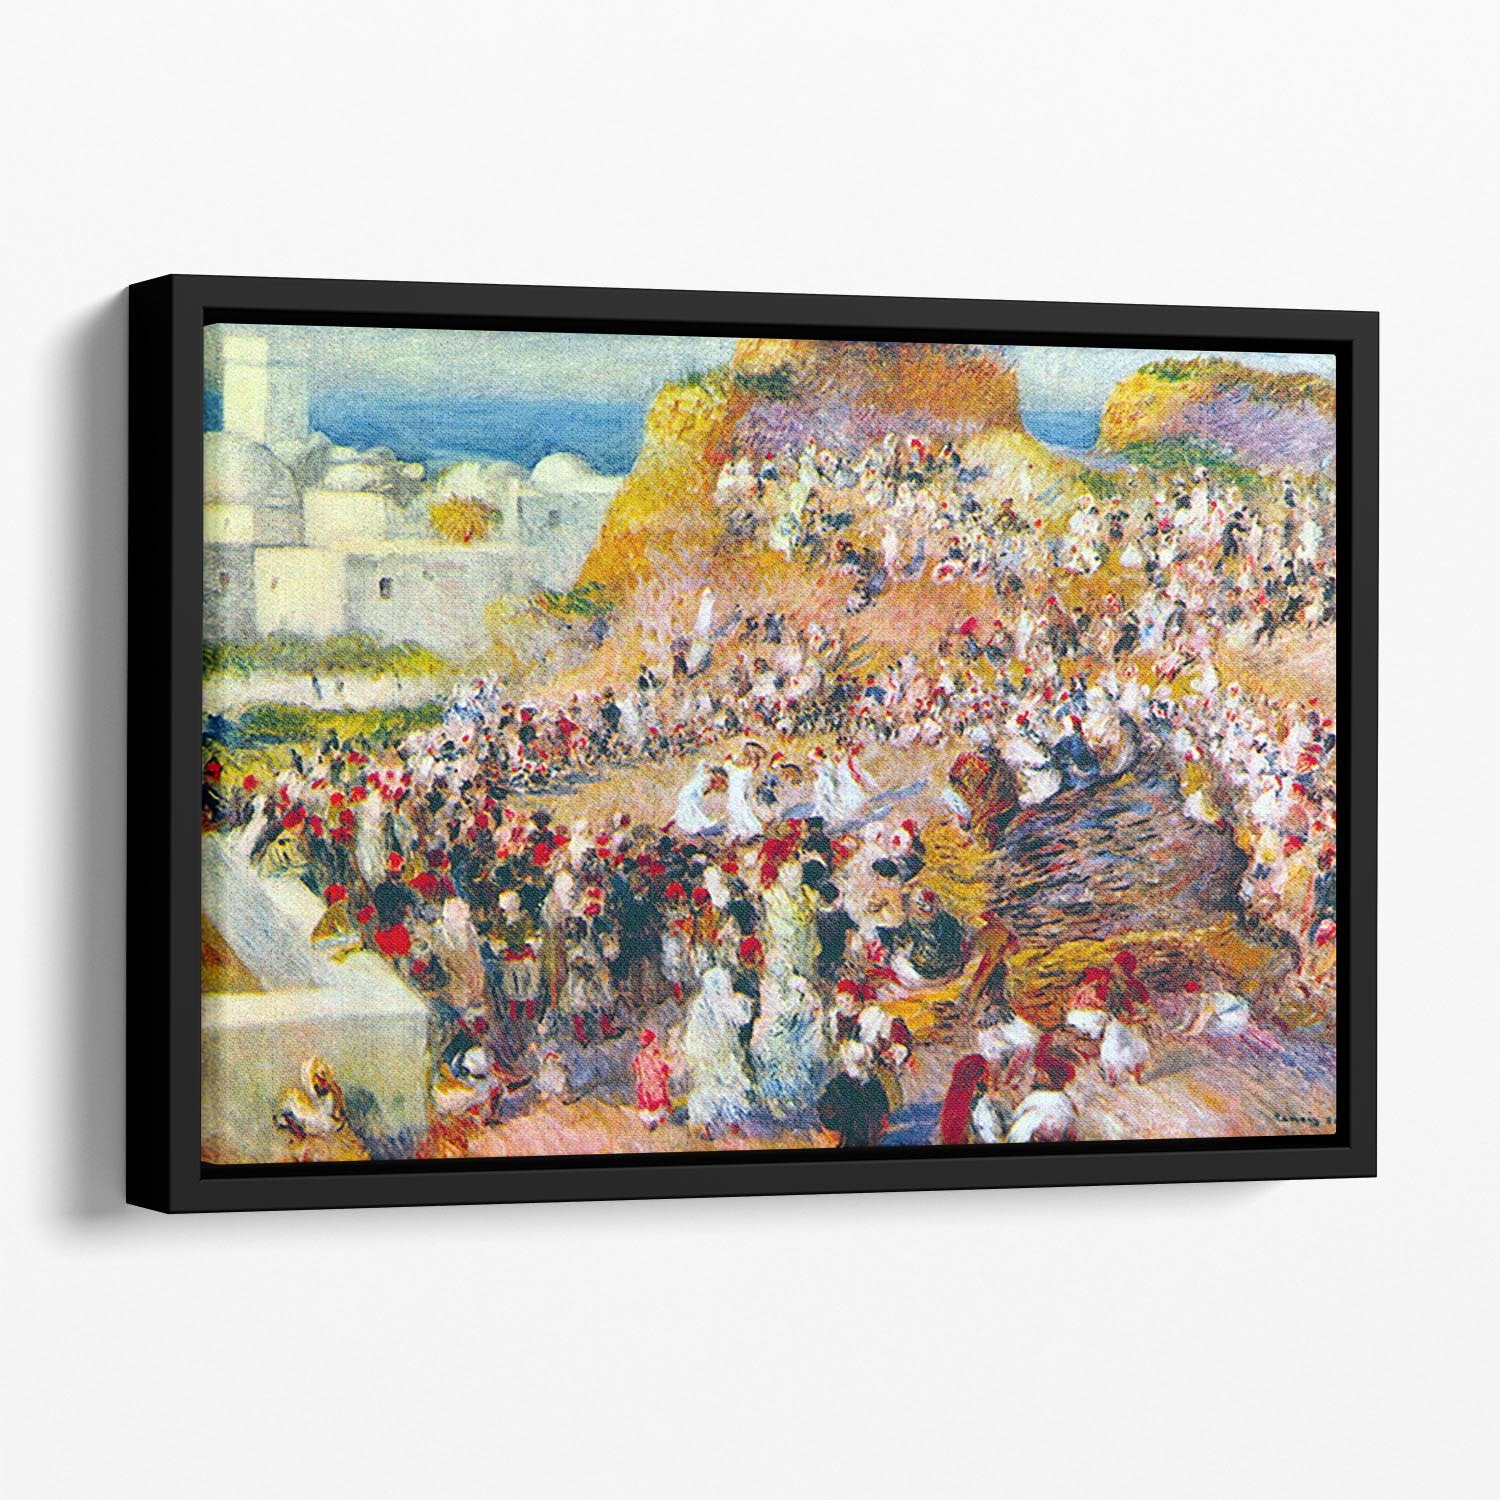 The mosque Arabian Fest by Renoir Floating Framed Canvas